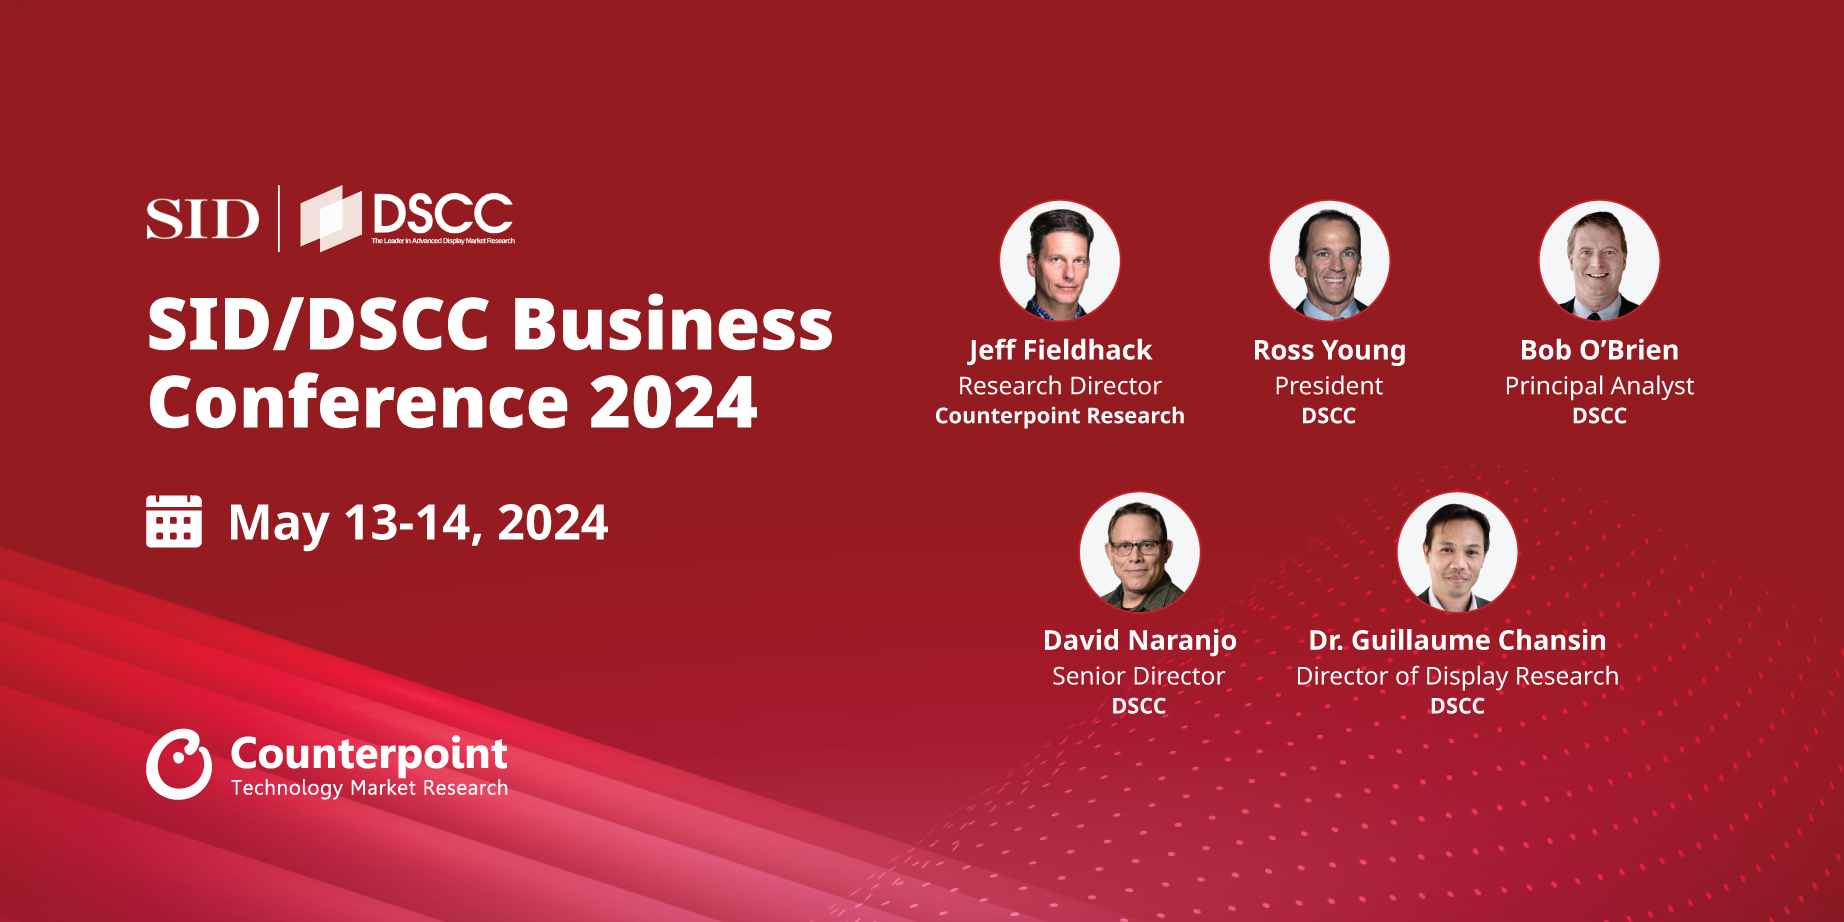 Join us at the SID/DSCC Business Conference 2024 to Connect with Counterpoint Research